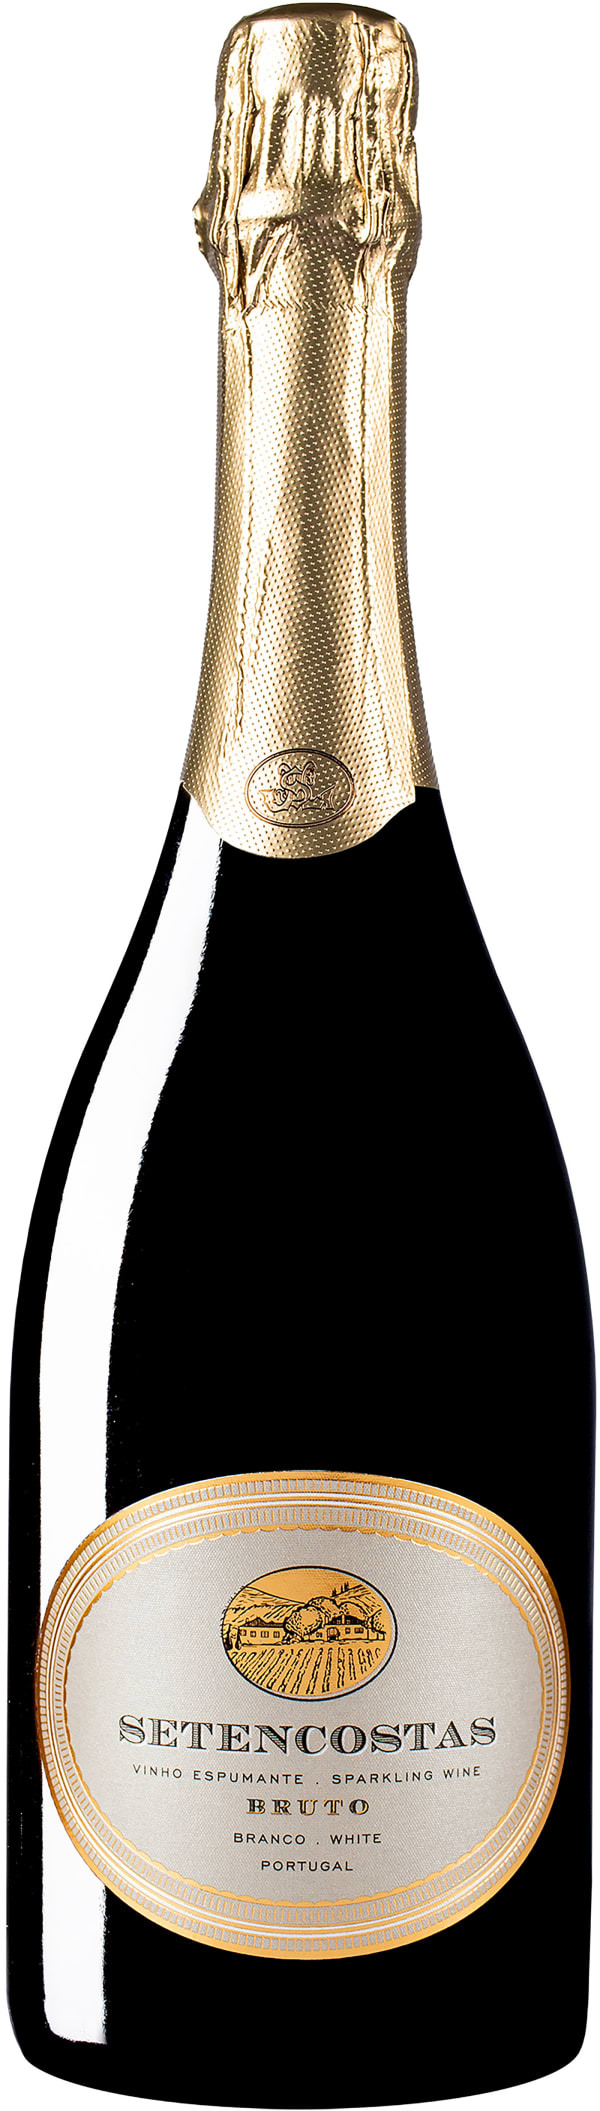 Drappier Carte d’Or Champagne Brut 2002